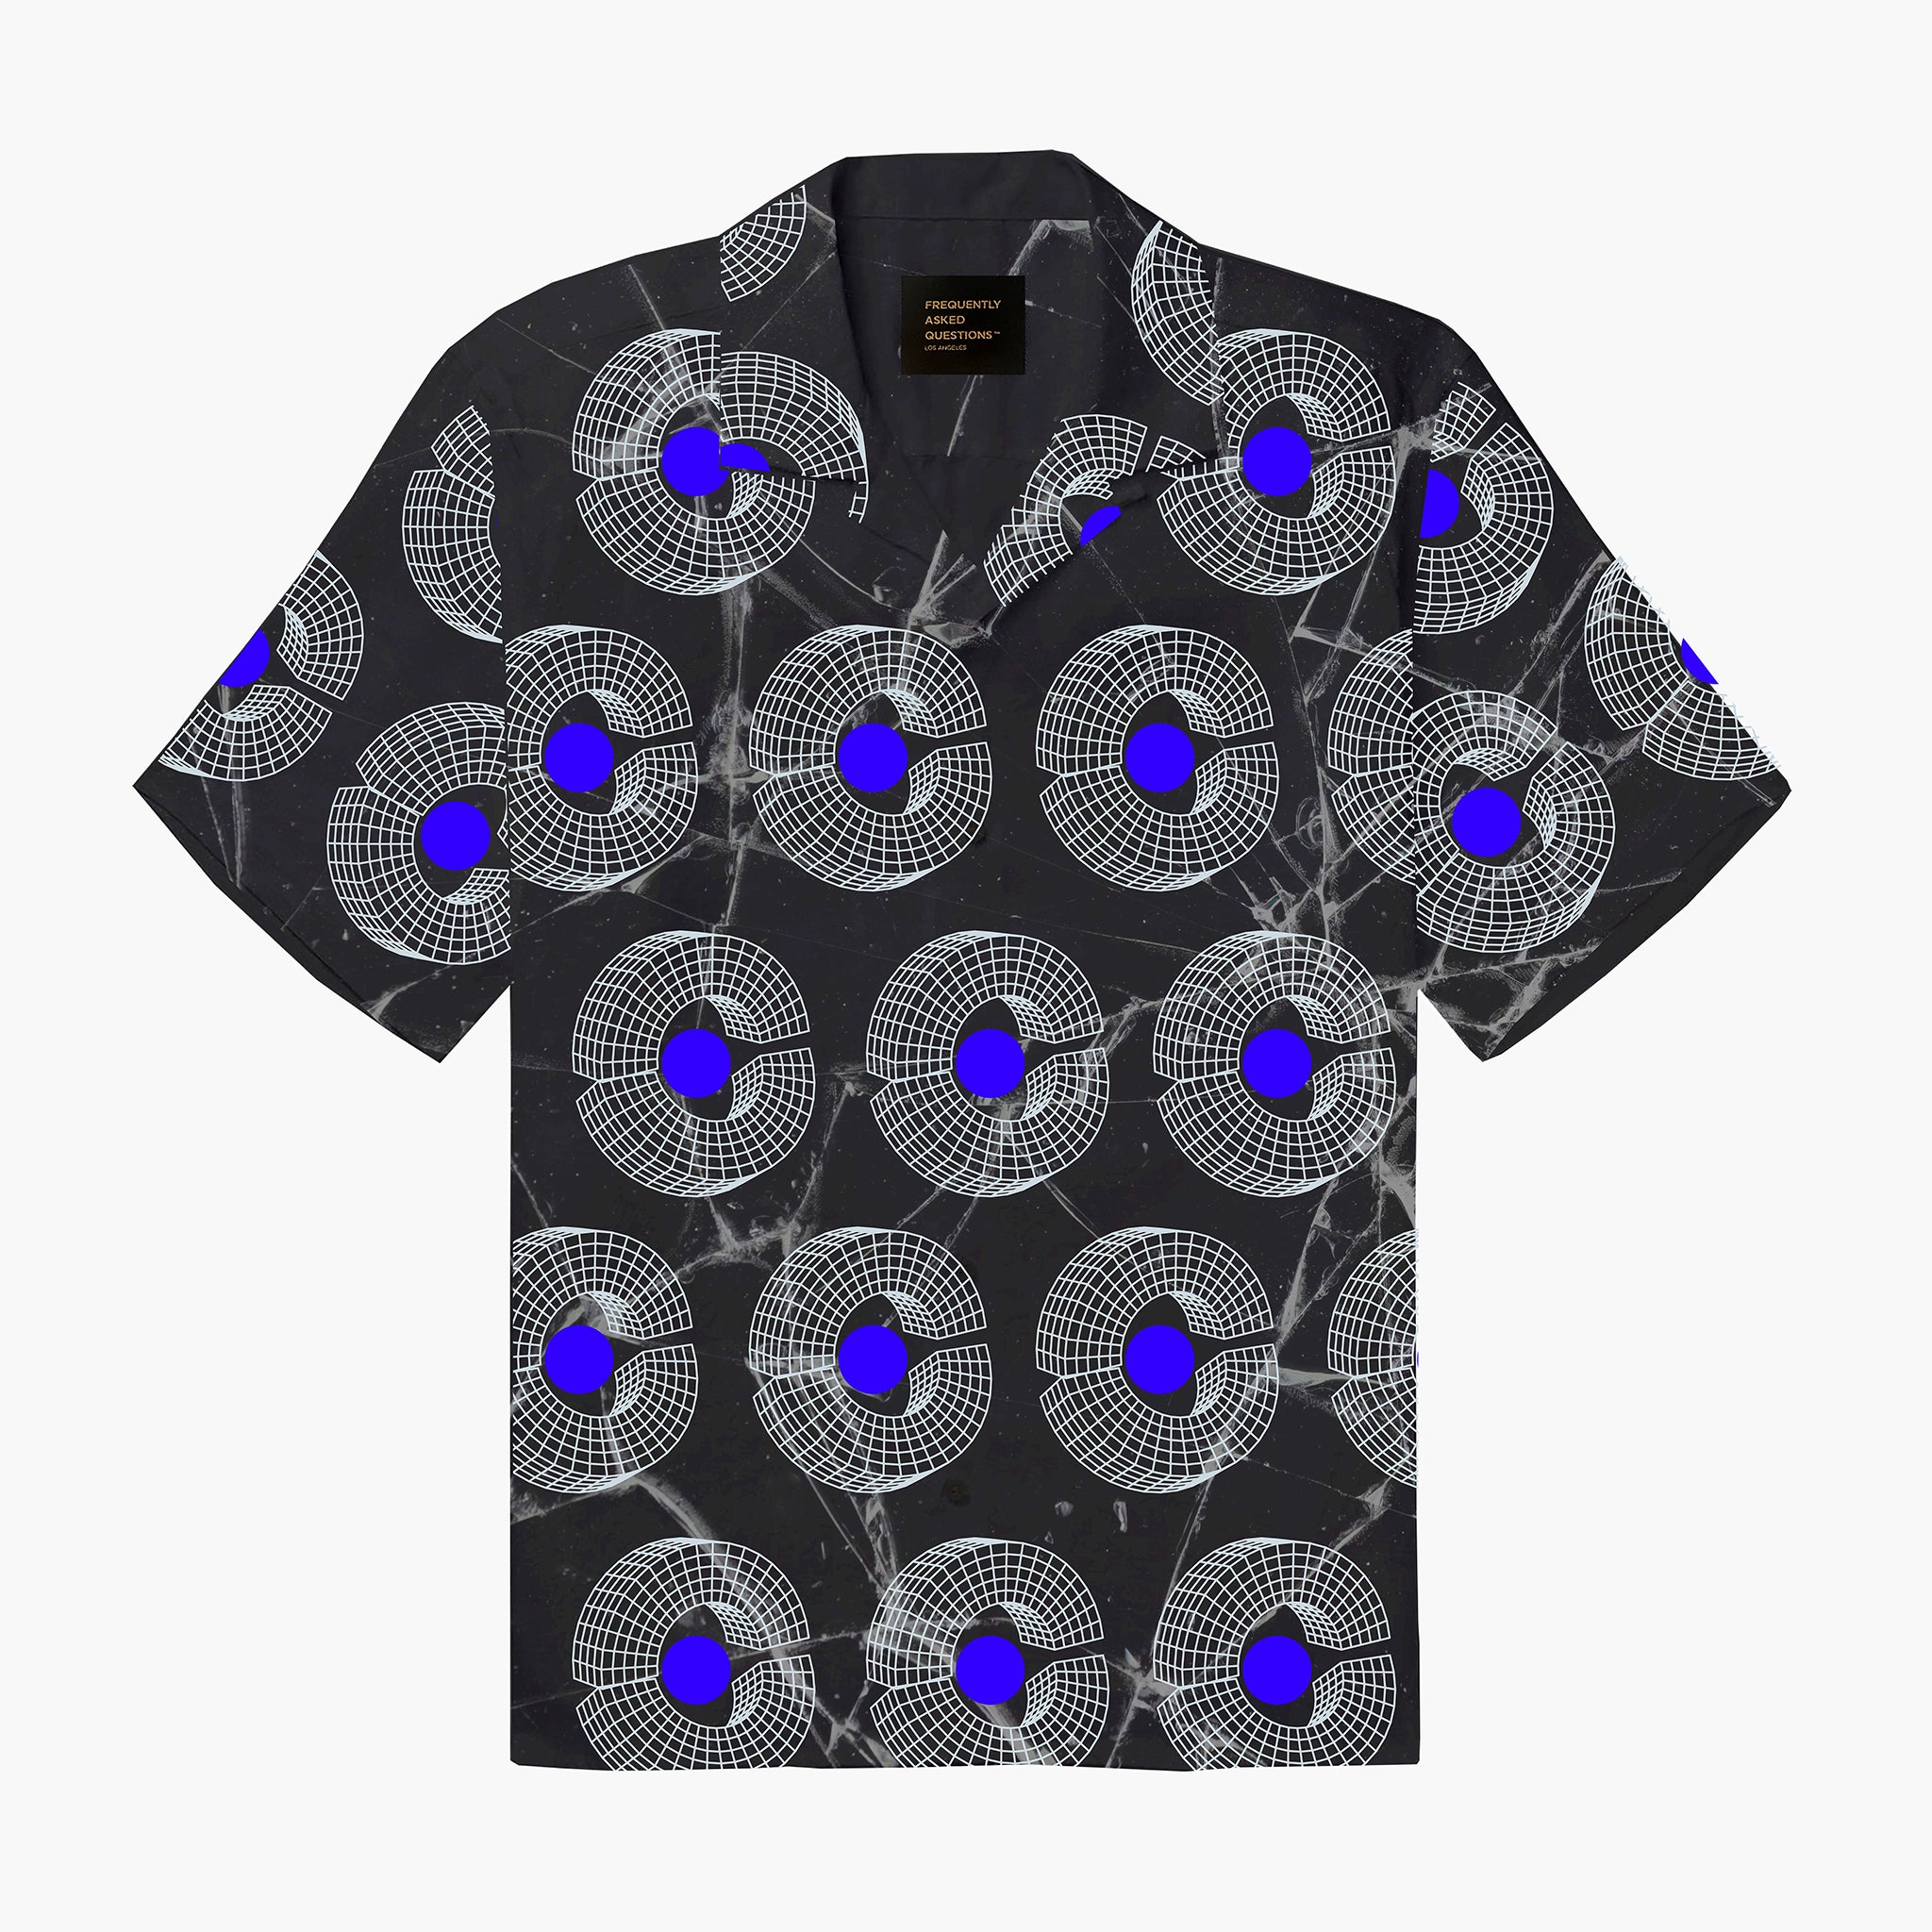 Cosmic Orbit Rayon Shirt - Frequently Asked Questions